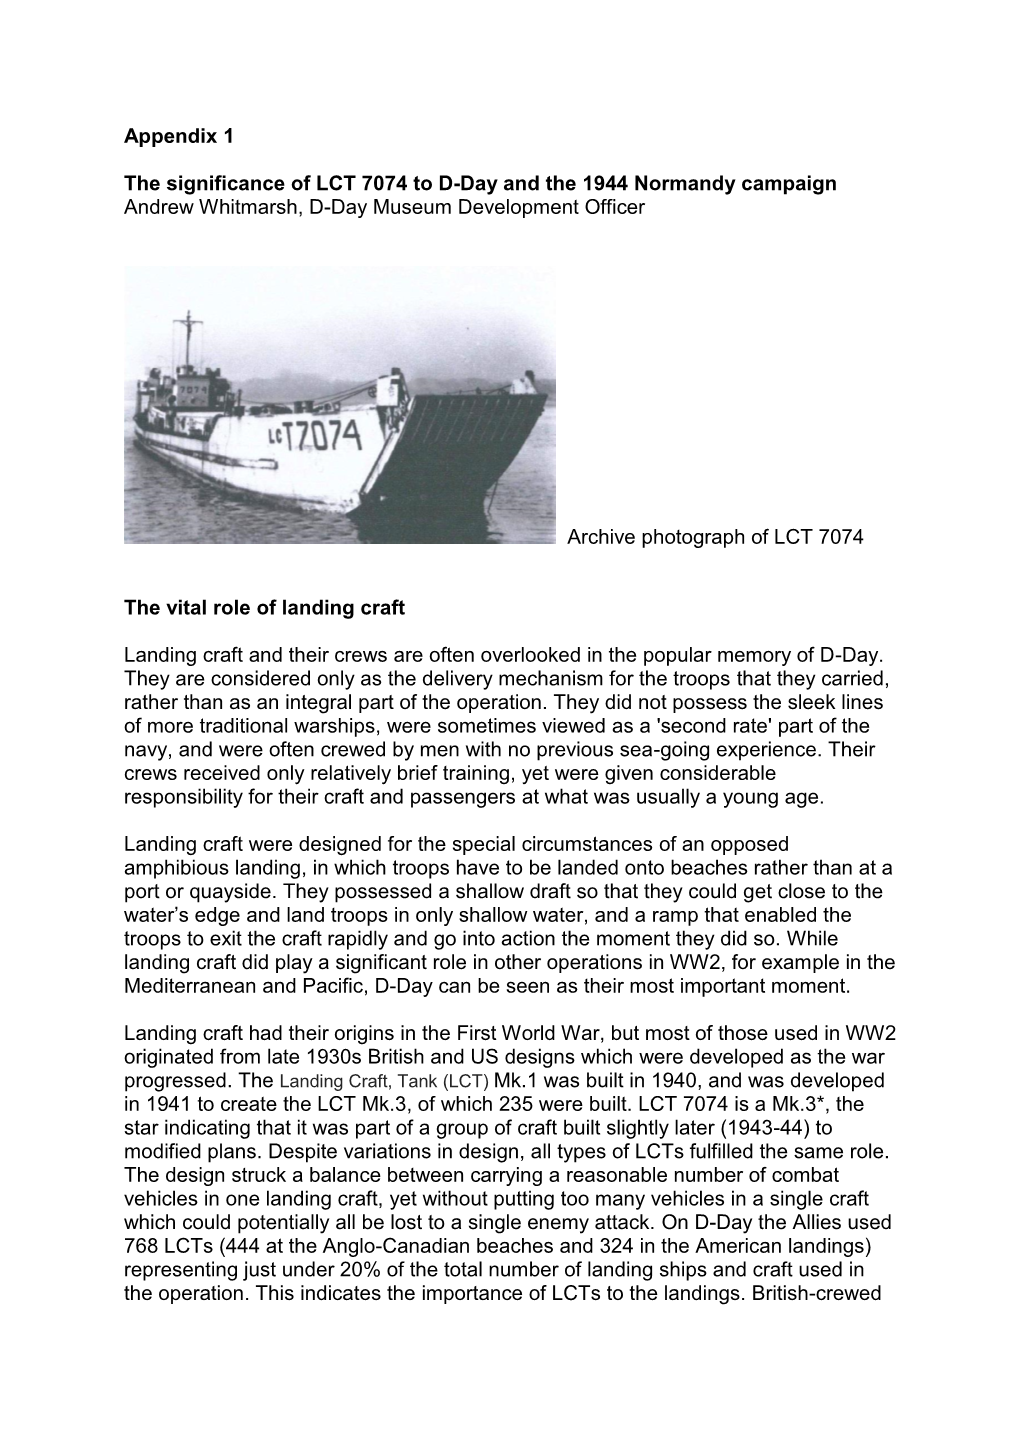 Appendix 1 the Significance of LCT 7074 to D-Day and the 1944